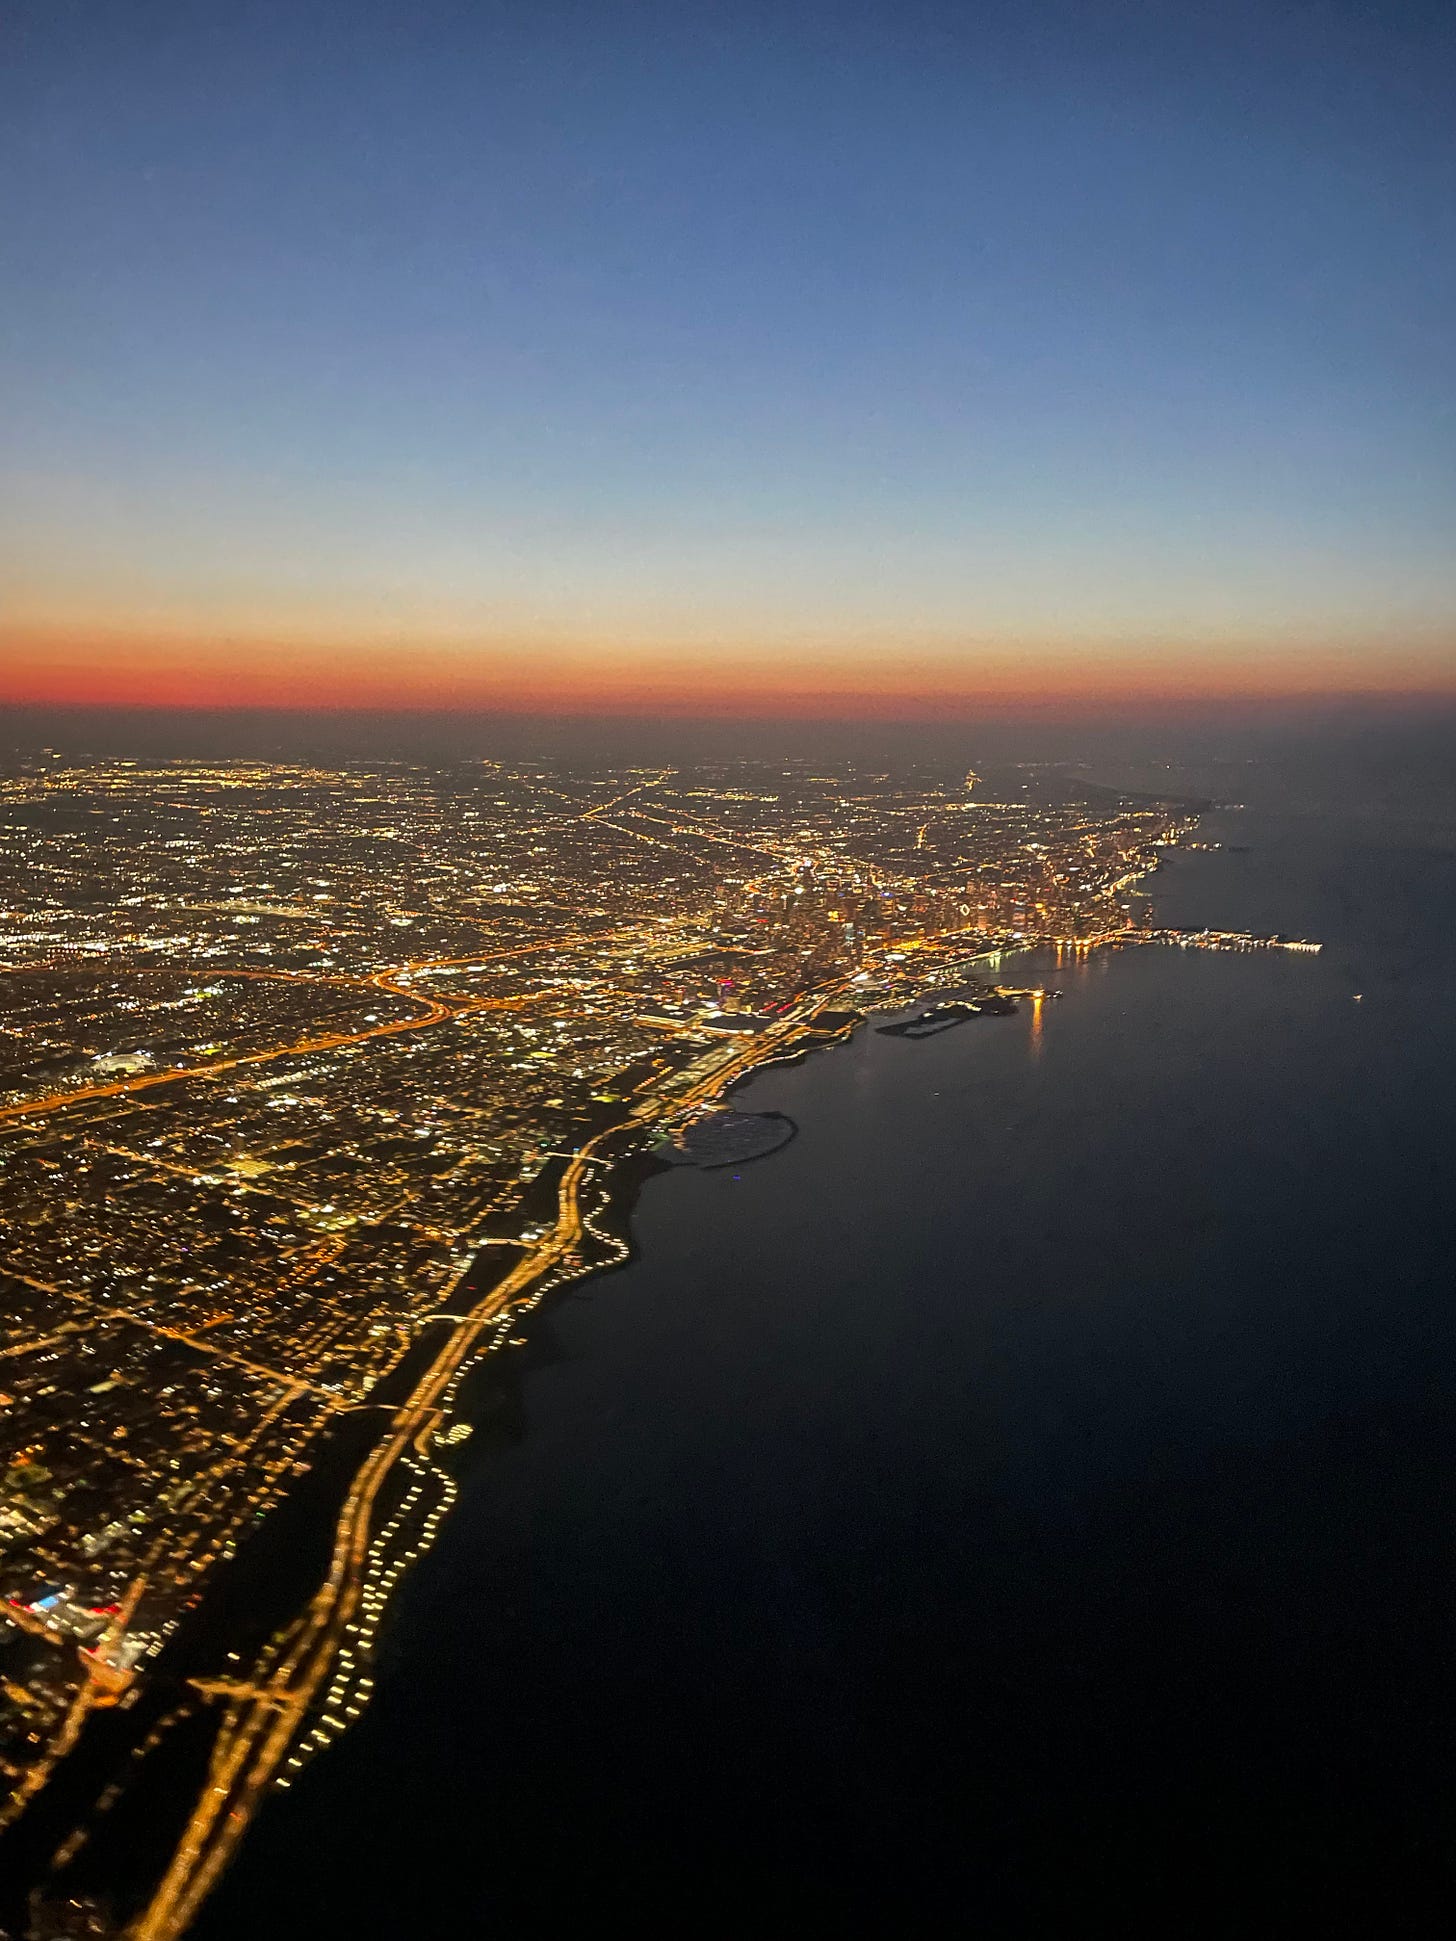 The waterfront of Chicago, seen from the air at twilight. Twinkling city lights can be seen below, and above the sky is painted hues of orange red and darkening blue.